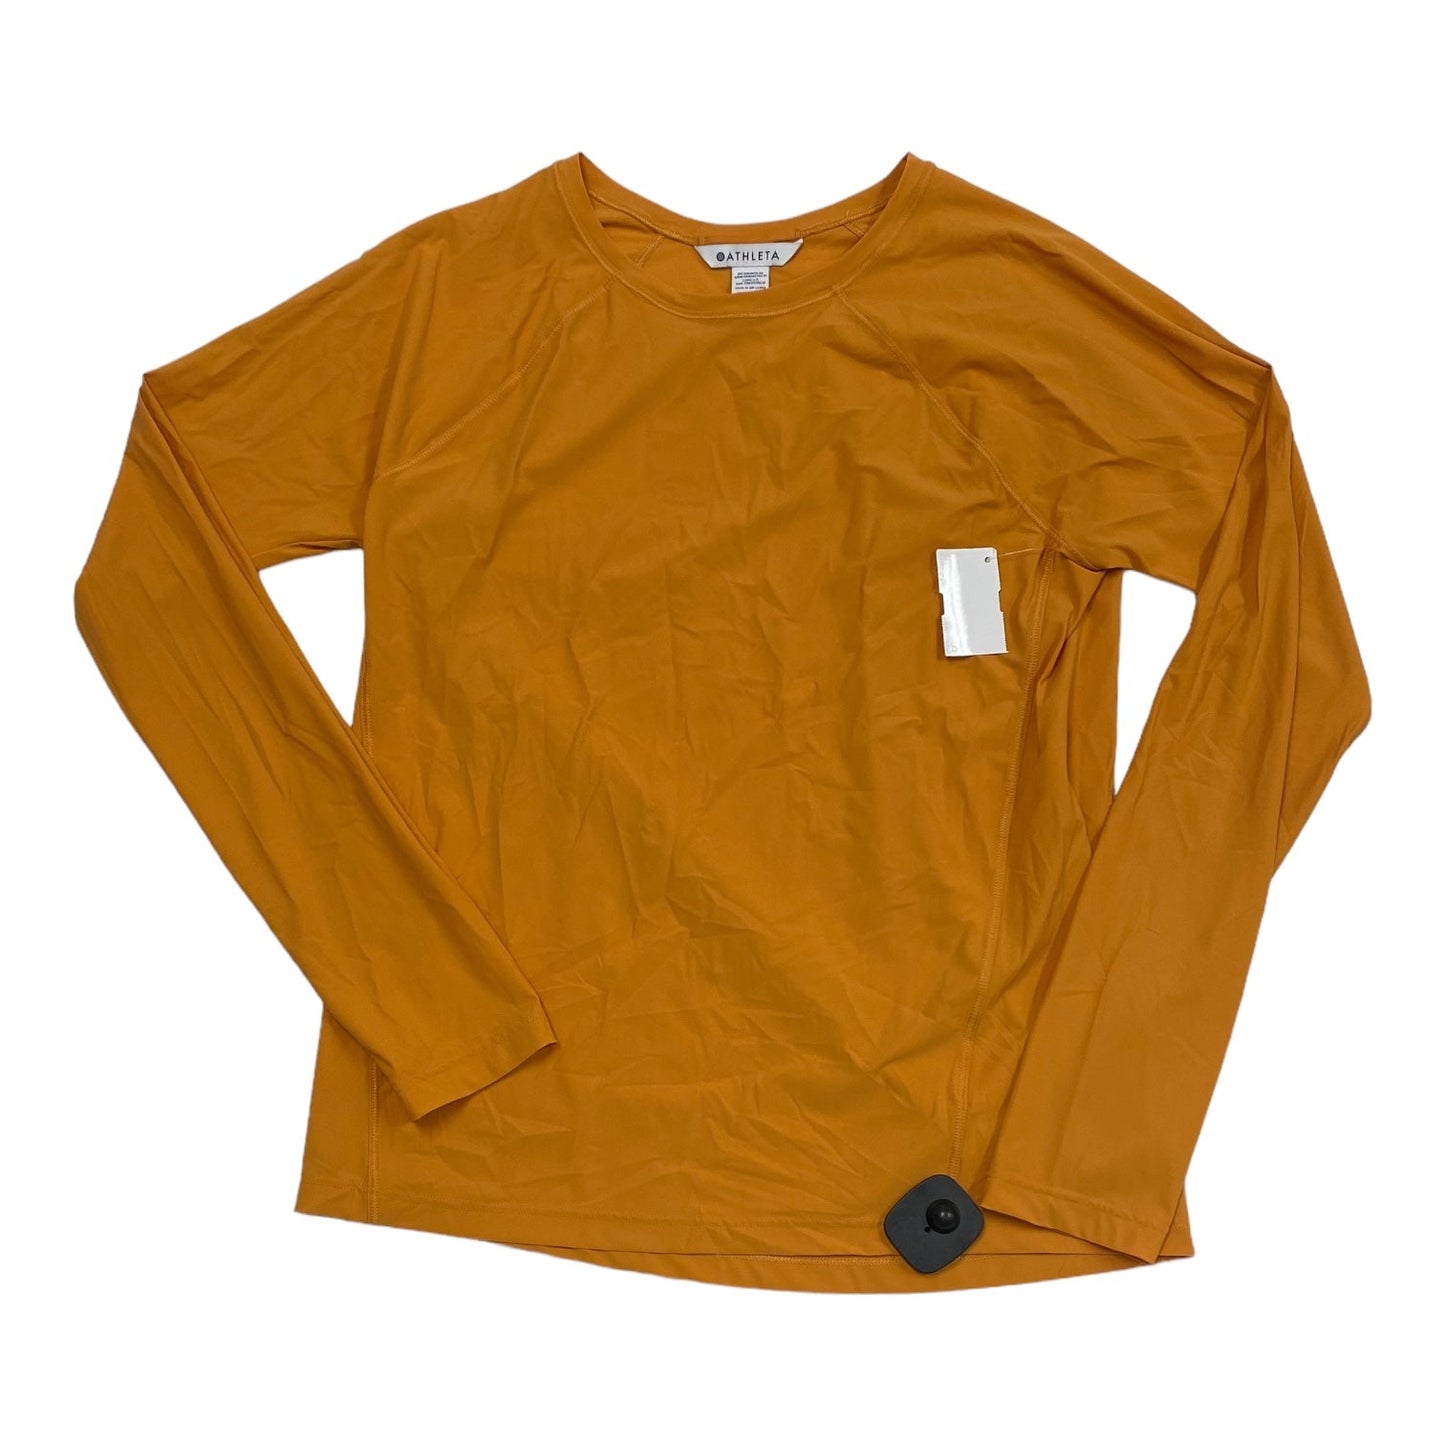 Athletic Top Long Sleeve Crewneck By Athleta  Size: S